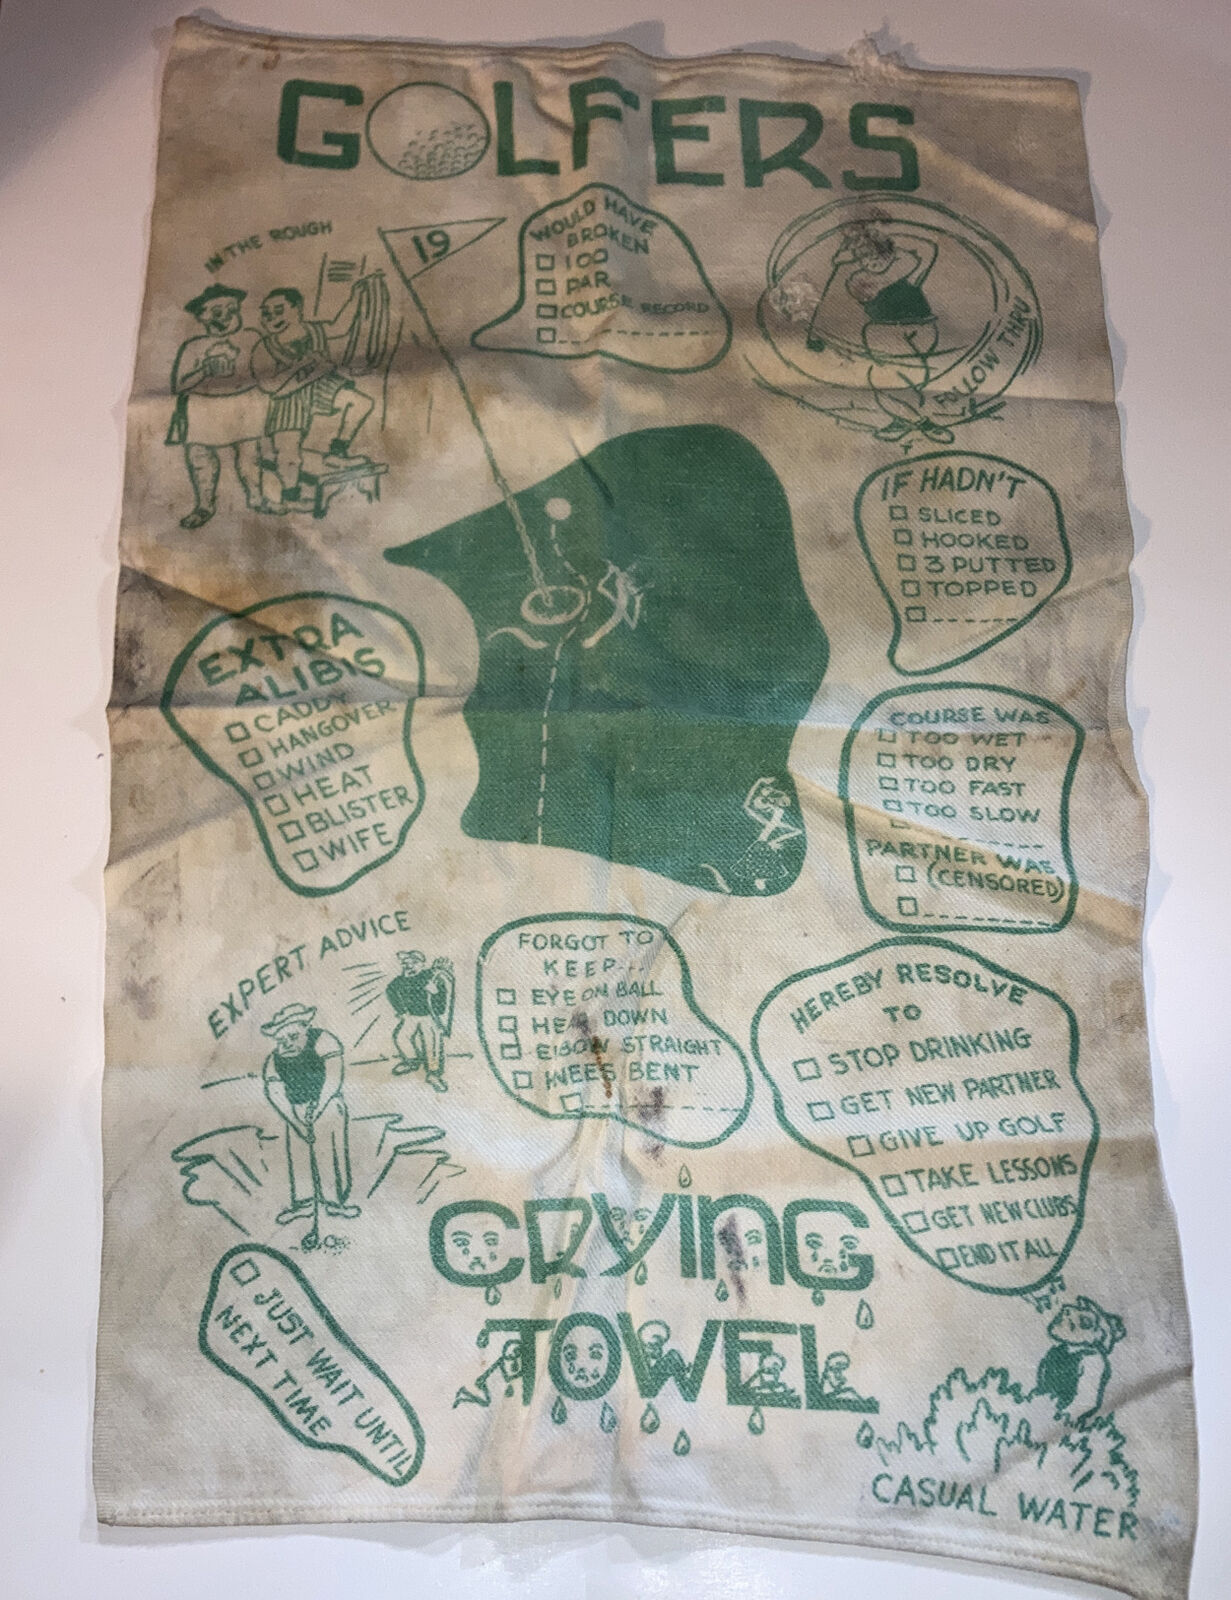 Vintage Crying Towel Golfer’s Crying Towel Novelty